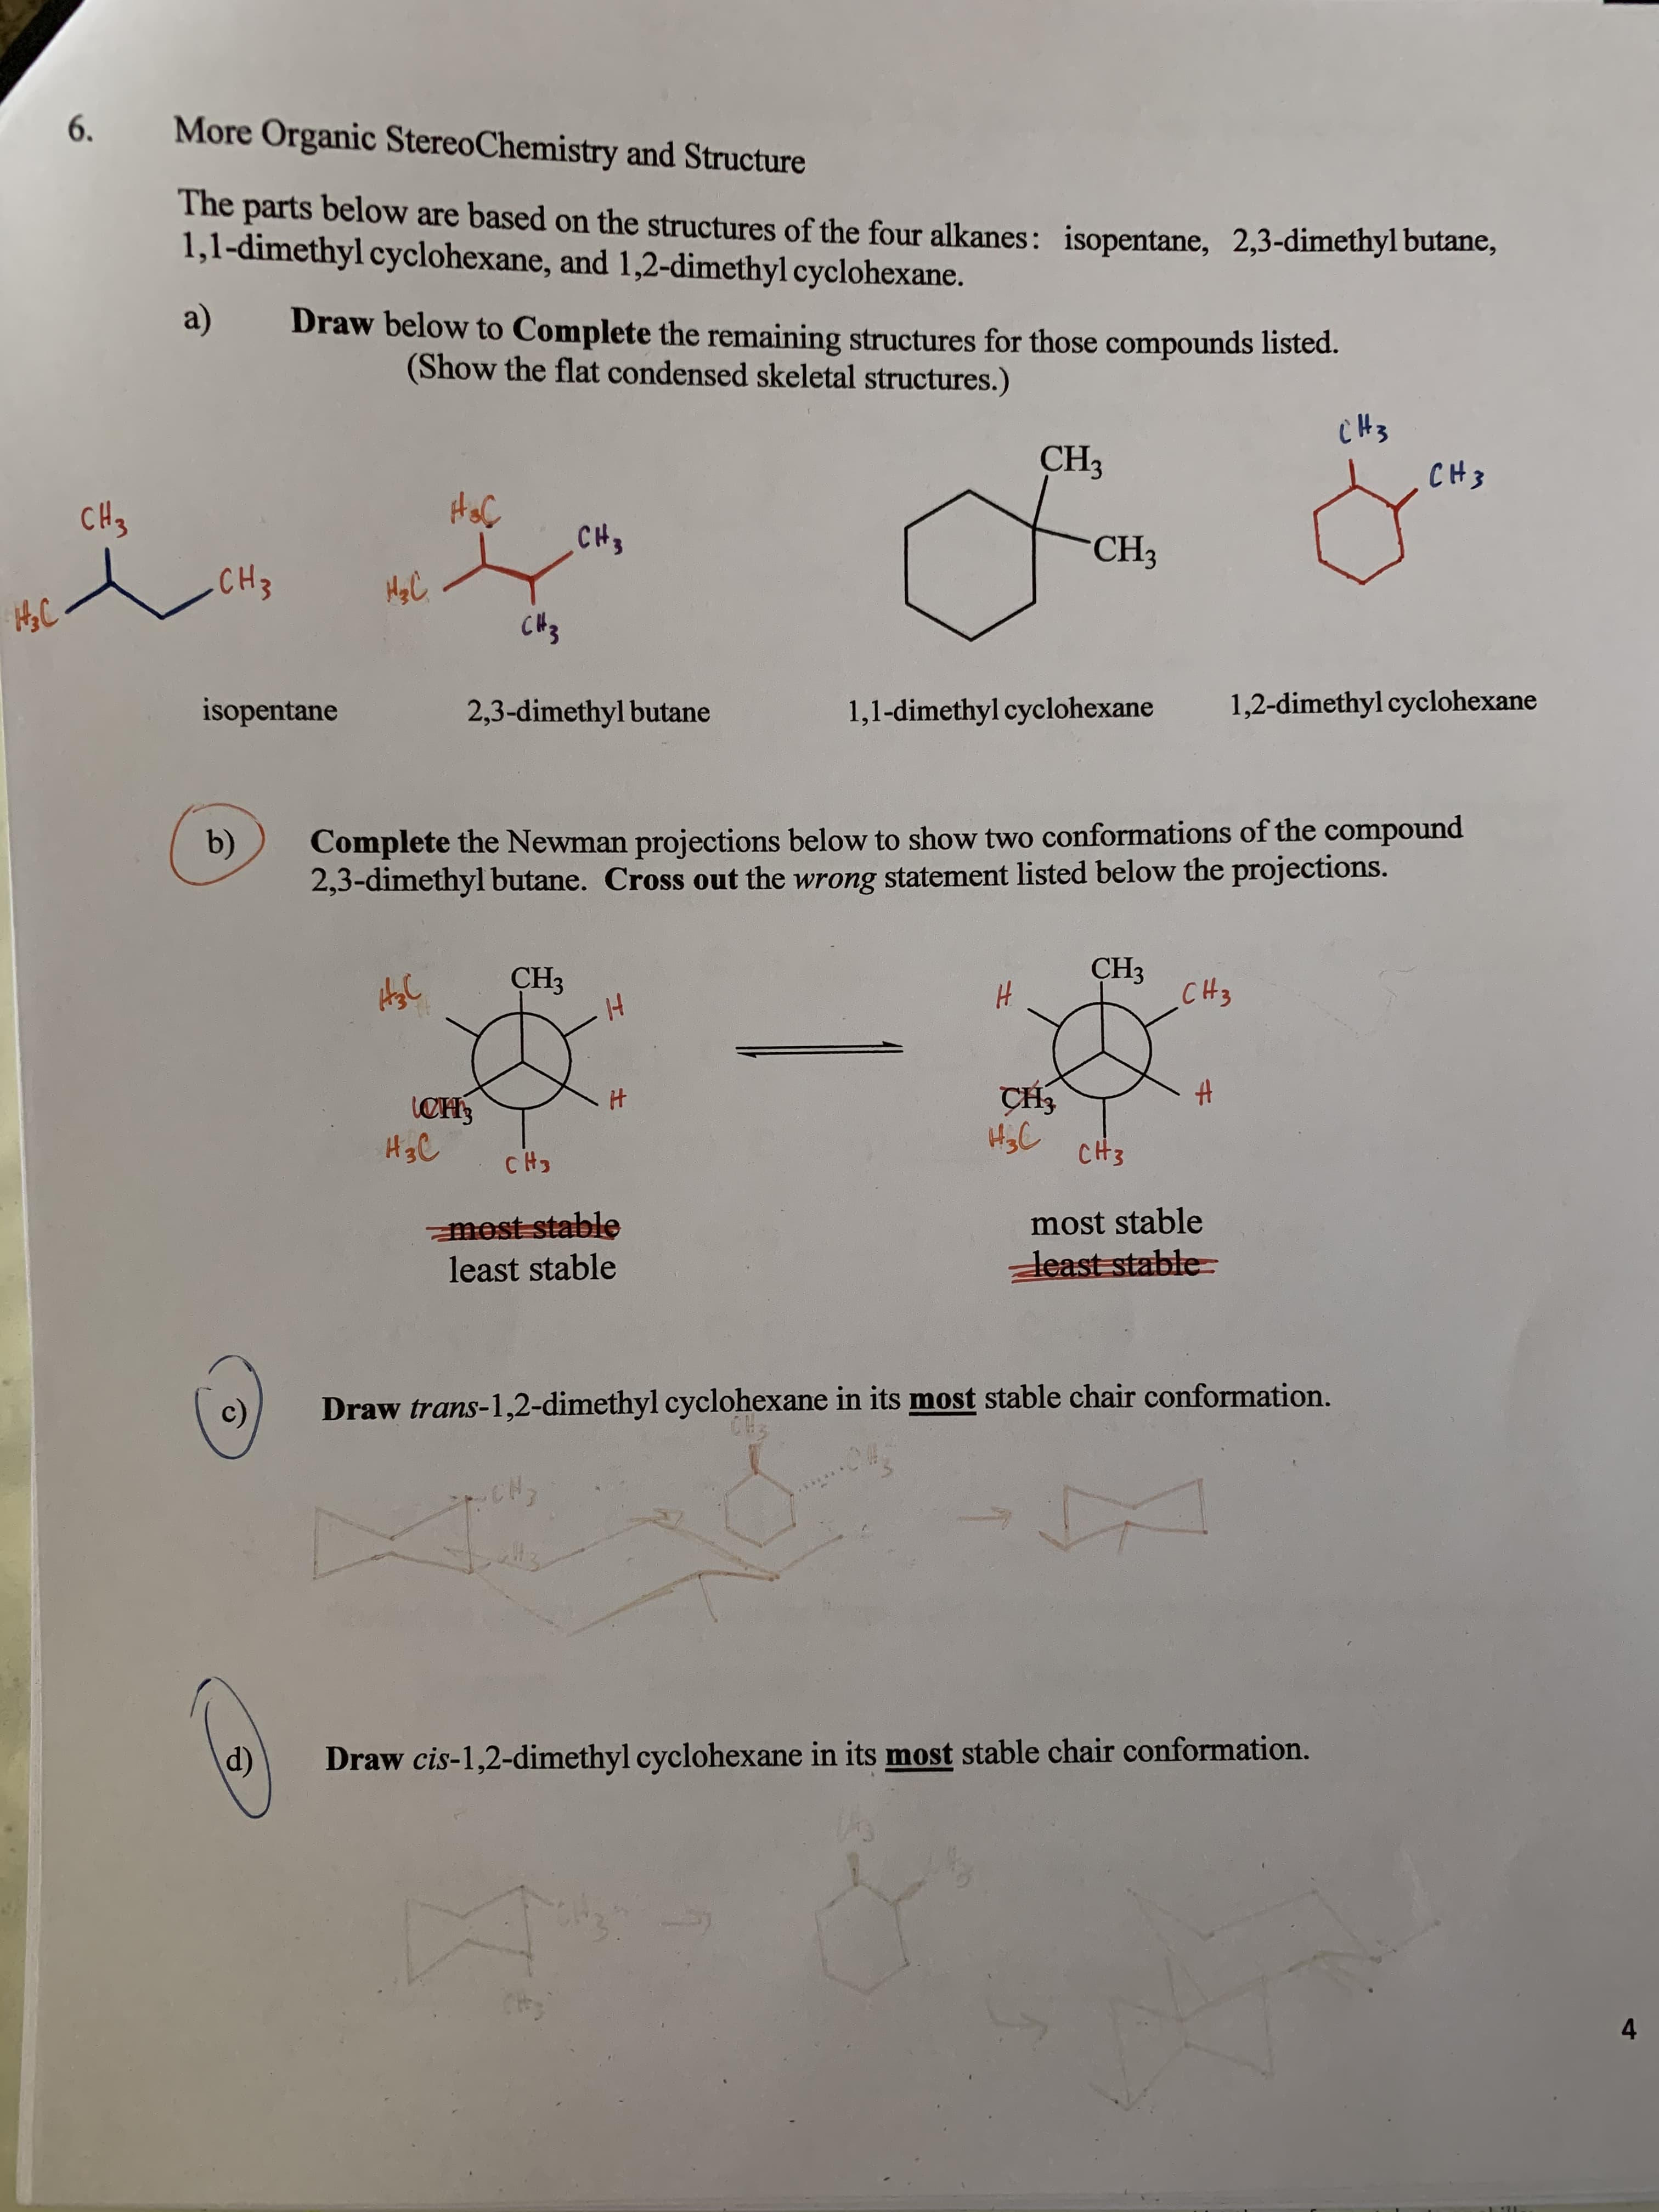 More Organic StereoChemistry and Structure
6
.
The parts below are based on the structures of the four alkanes: isopentane, 2,3-dimethyl butane,
1,1-dimethyl cyclohexane, and 1,2-dimethyl cyclohexane.
a)
Draw below to Complete the remaining structures for those compounds listed.
(Show the flat condensed skeletal structures.)
CH3
CНз
CH3
CHS
сH,
"СH,
.CH3
C 3
1,2-dimethyl cyclohexane
isopentane
2,3-dimethyl butane
1,1-dimethyl cyclohexane
Complete the Newman projections below to show two conformations of the compound
2,3-dimethyl butane. Cross out the wrong statement listed below the projections.
b)
СHз
CH3
CHз
сHя
4
H
H3C
CH3
mest stable
least stable
most stable
least stable
Draw trans-1,2-dimethyl cyclohexane in its most stable chair conformation.
c)
Draw cis-1,2-dimethyl cyclohexane in its most stable chair conformation.
d)
